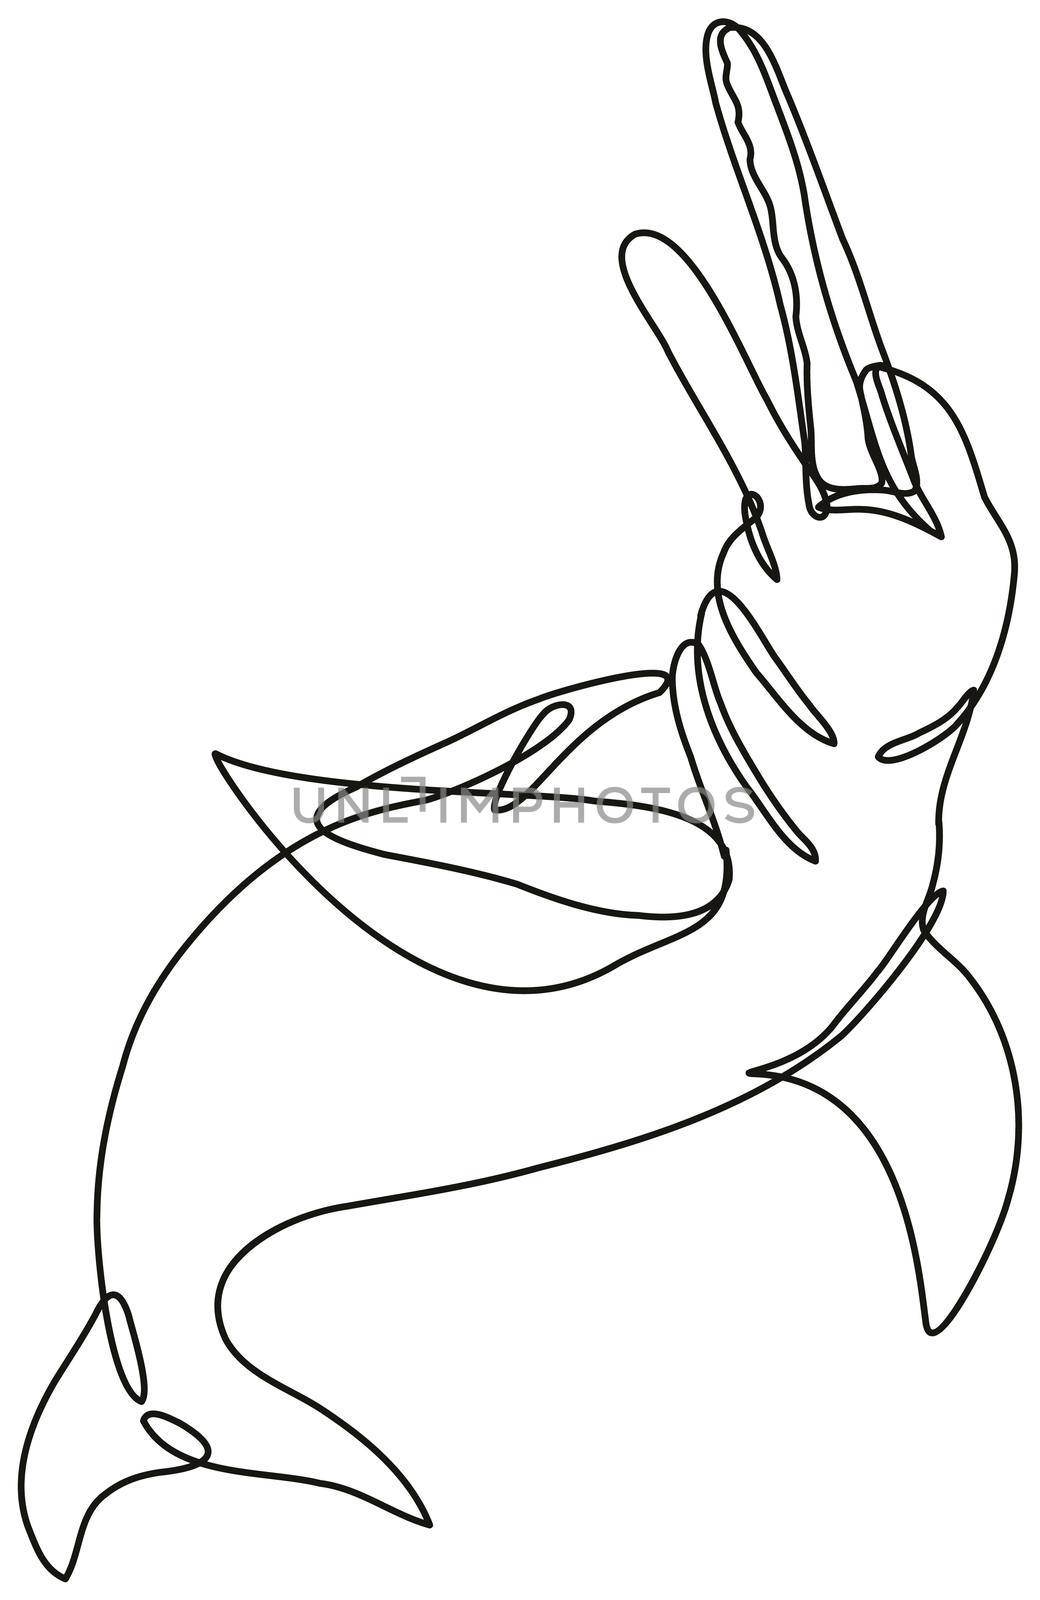 Amazon River Dolphin or Boto Inia Geoffrensis Continuous Line Drawing  by patrimonio